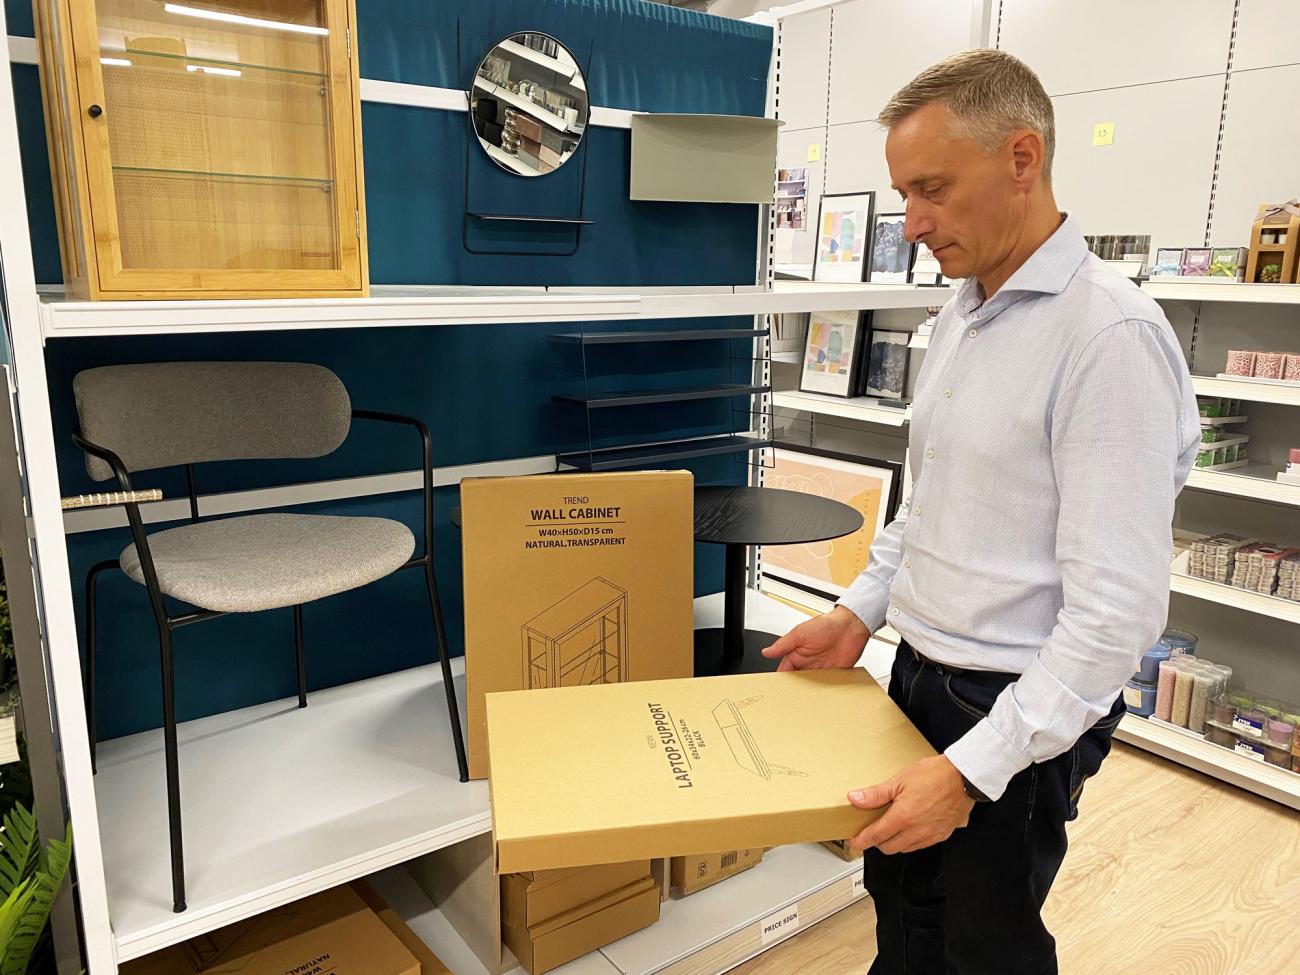 Lars Høgh Jensen, who is Packaging Development Specialist at JYSK, has taken the lead on the optimised packaging.